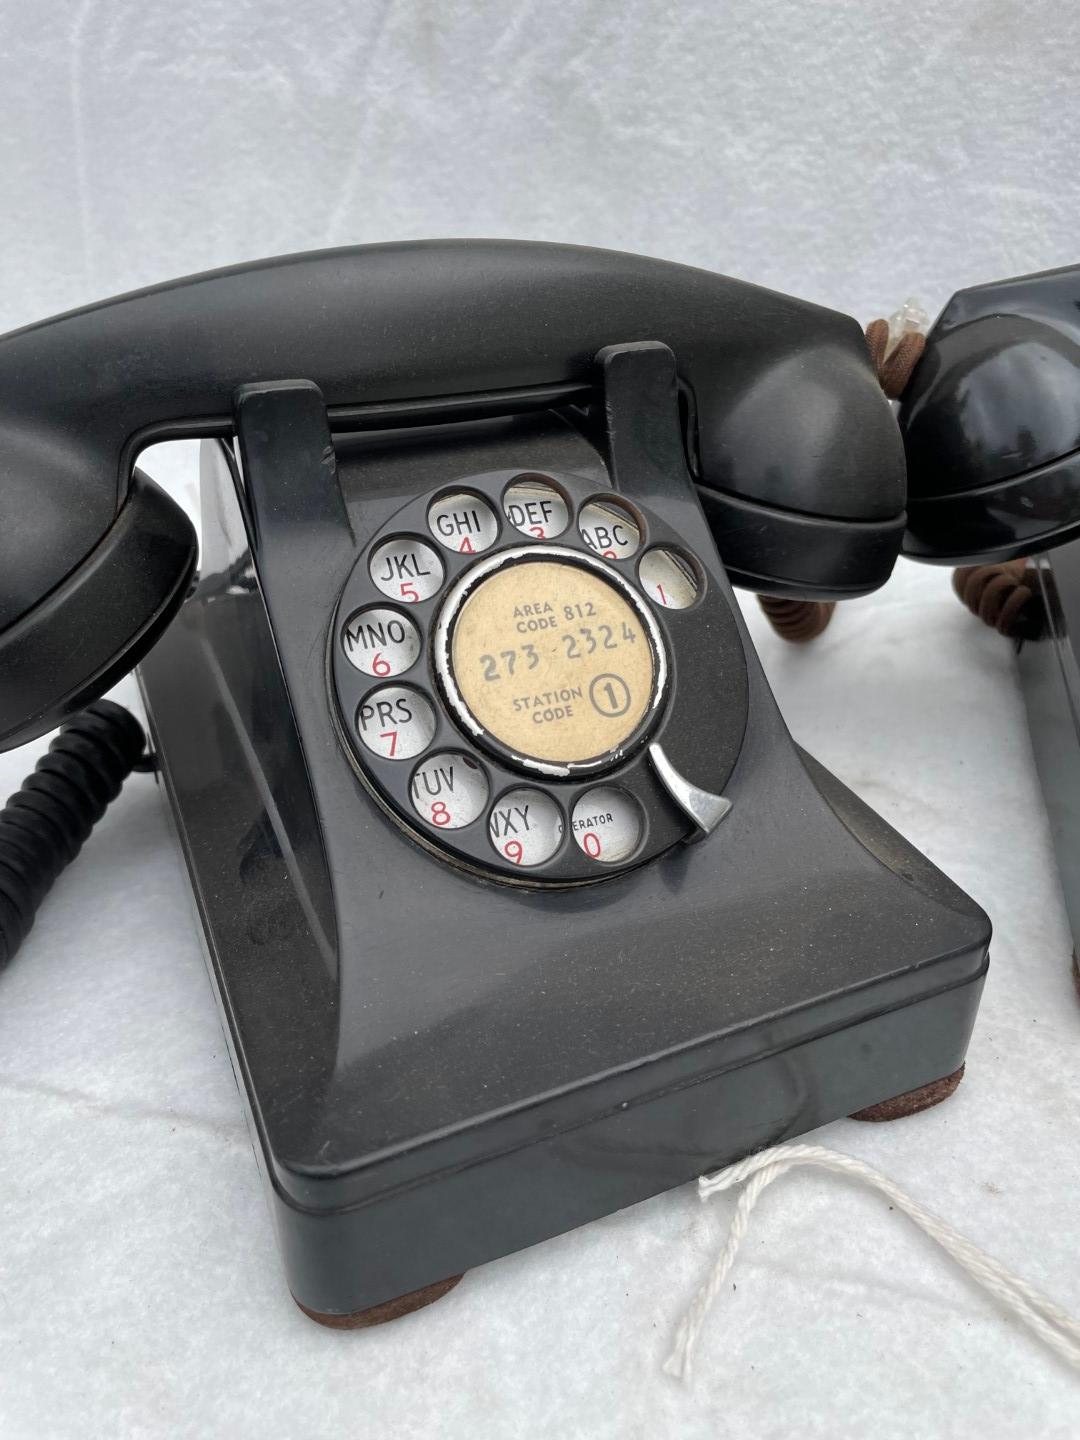 THREE working Western Electric model 302s in good condition